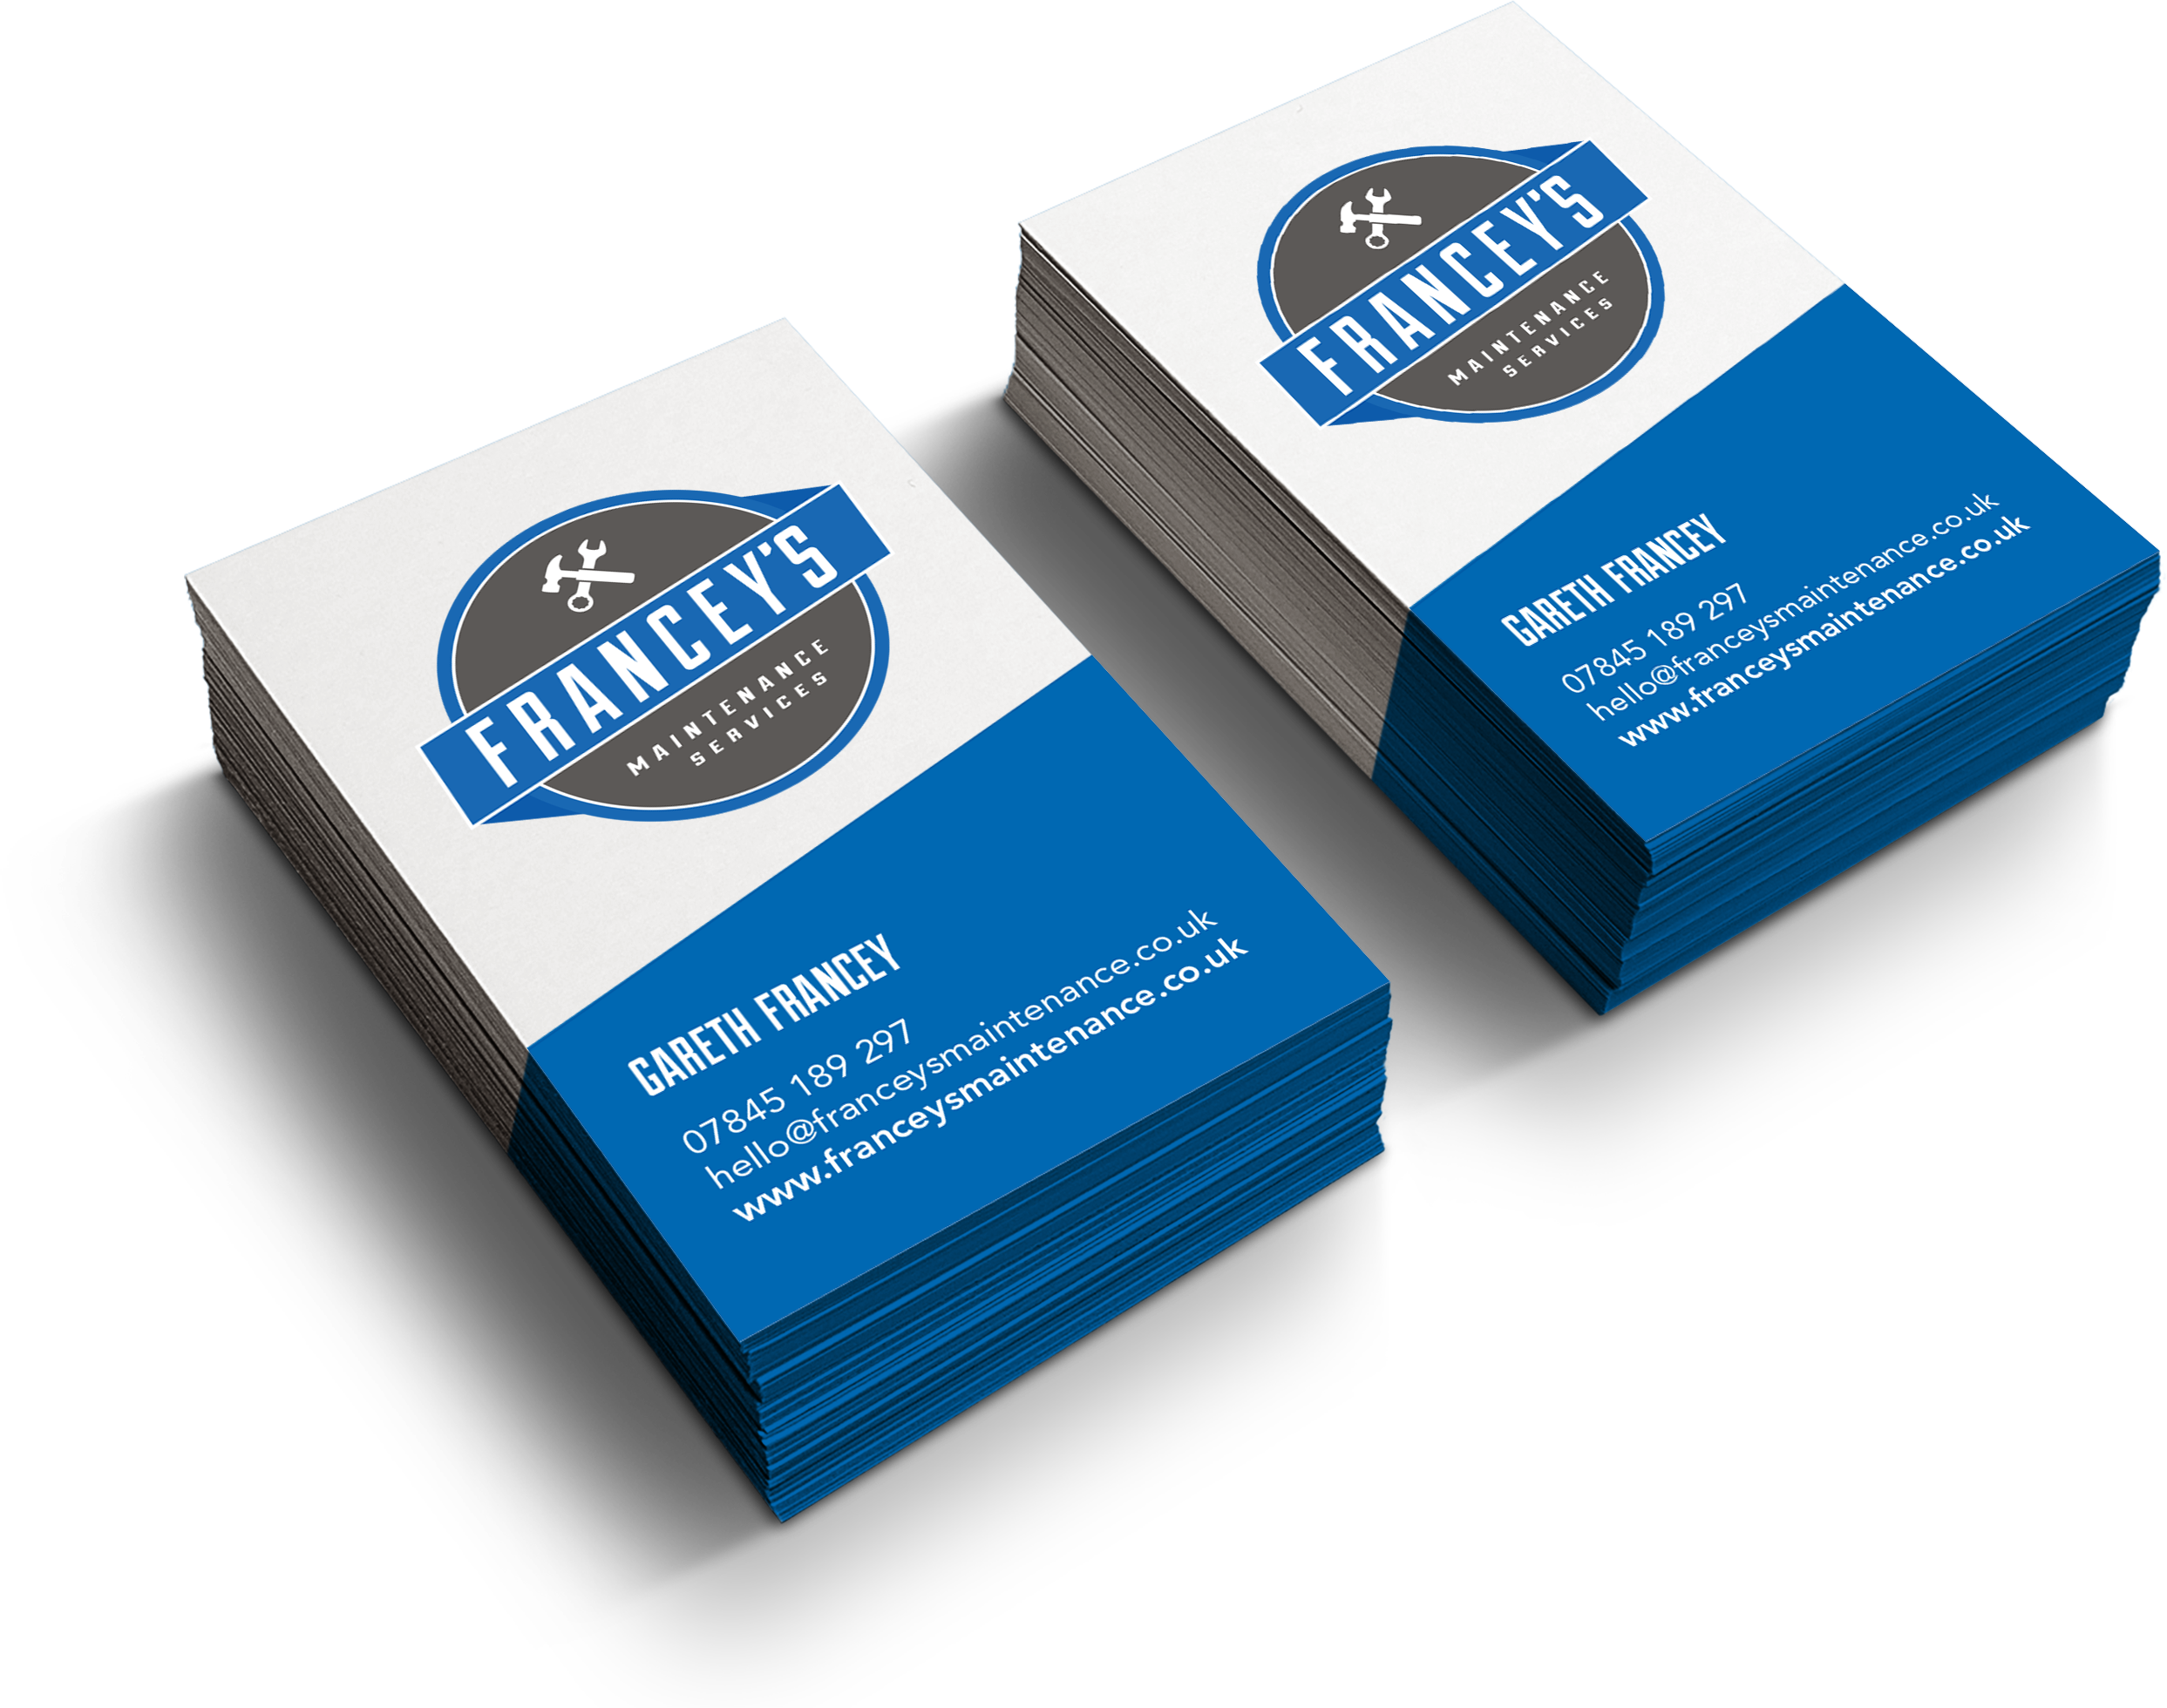 Stack of blue and white business cards with Francey's Maintenance logo and contact details